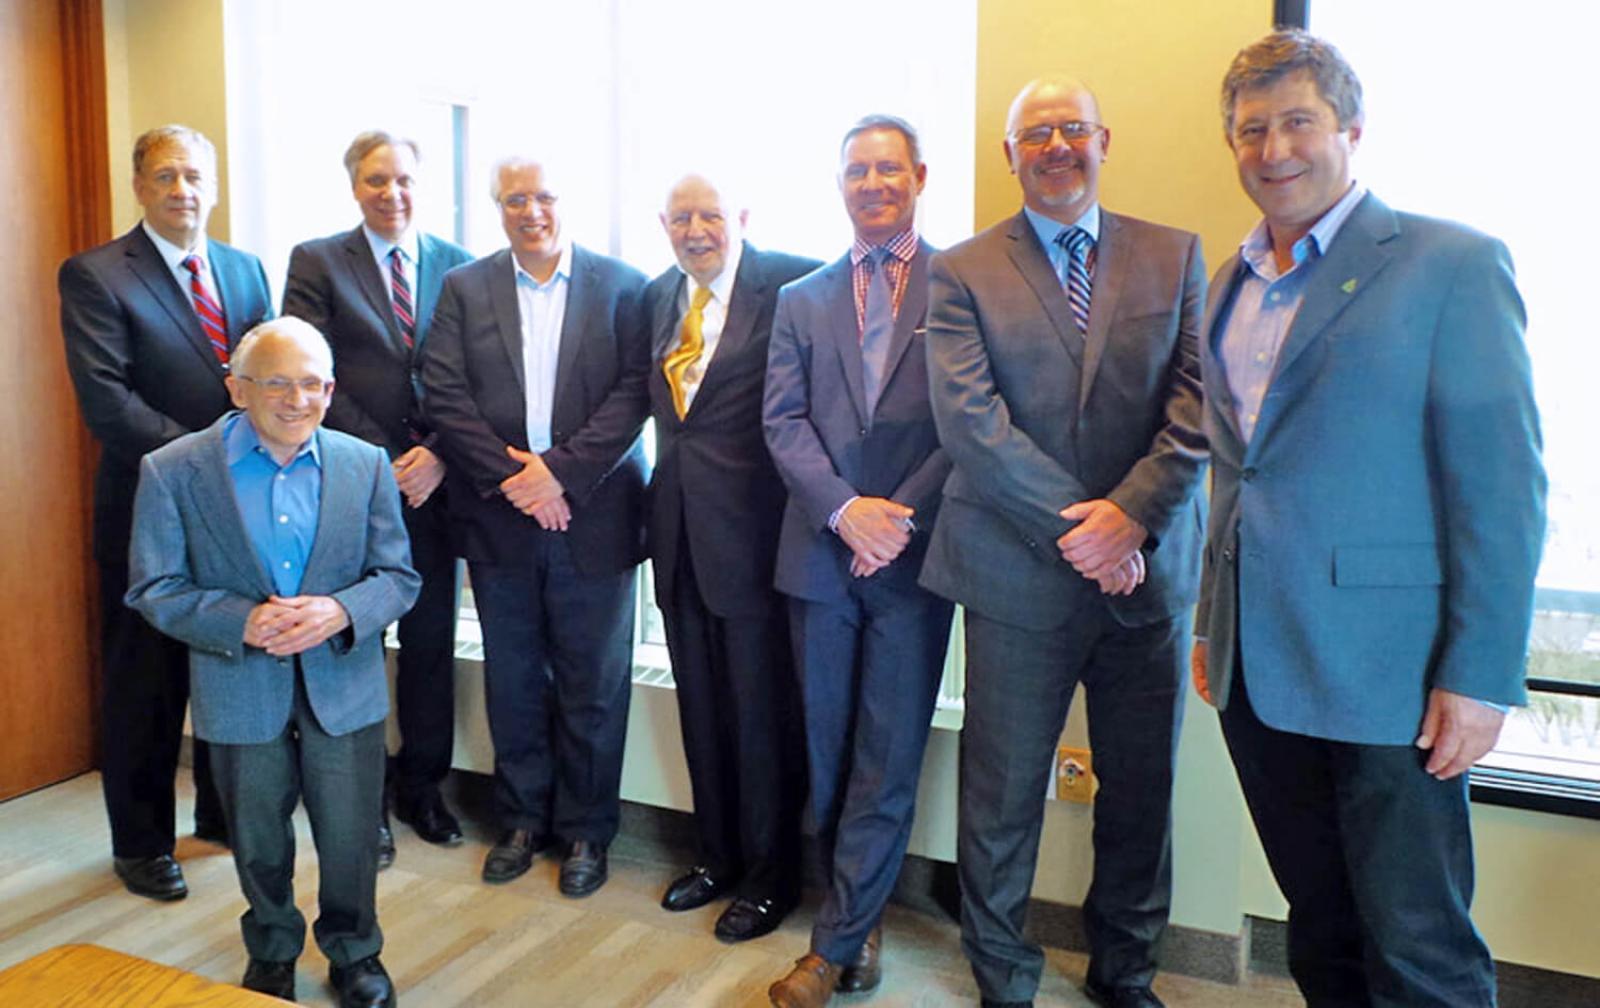 Left to right: Gary Lacy, Executive Director NCC; John Cary, Chief Executive MLF; Dr. Mark Kristmanson, Chief Executive Officer NCC; Tony DiGiovanni, Executive Director Landscape Ontario; Ken Jewett, founder MLF; James Jewett, Director MLF; Marc Corriveau, Director Urban Lands and Transportation; Mike Rosen, President Tree Canada.